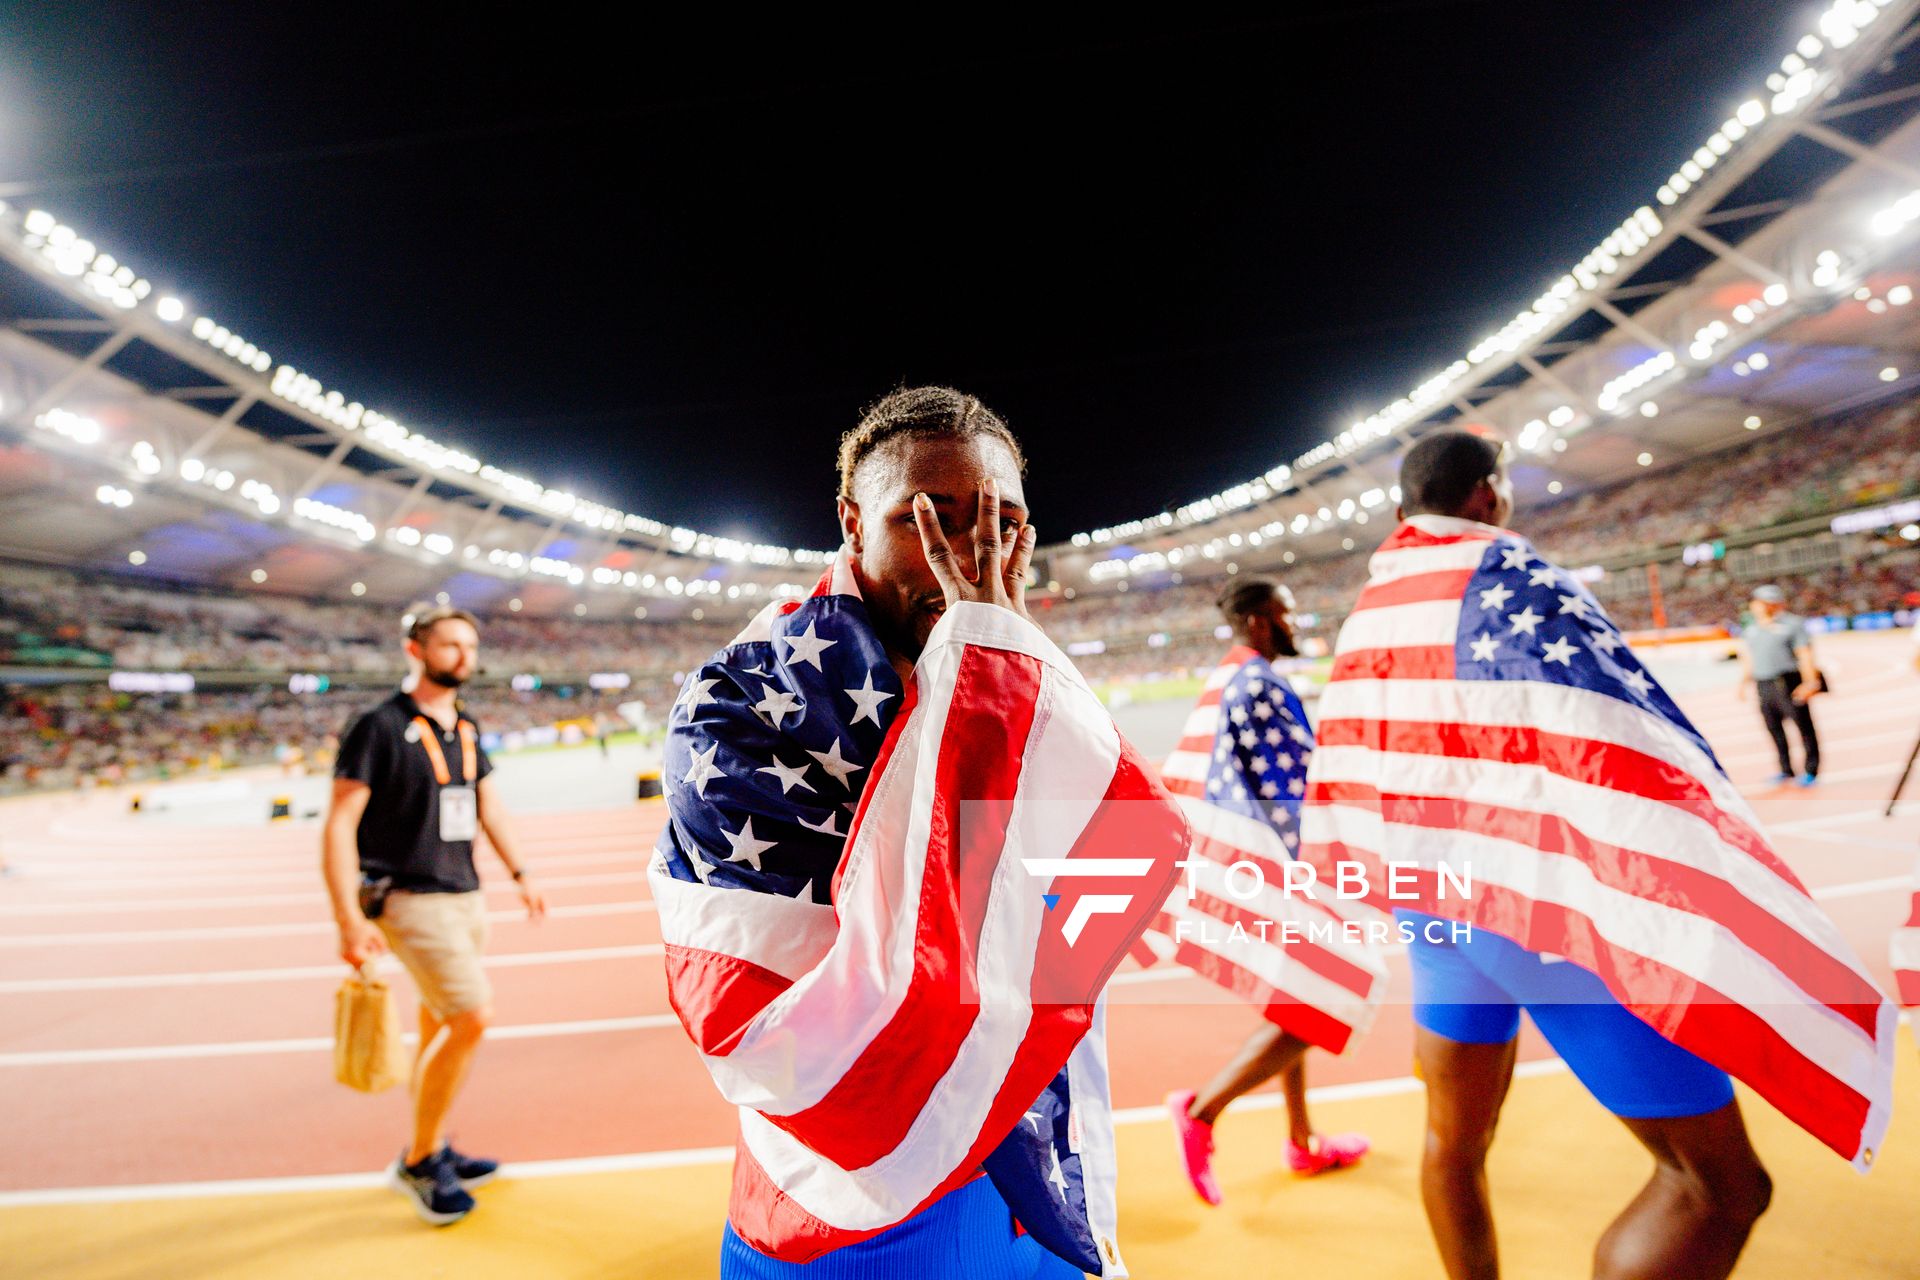 Noah Lyles (USA/United States) on Day 8 of the World Athletics Championships Budapest 23 at the National Athletics Centre in Budapest, Hungary on August 26, 2023.